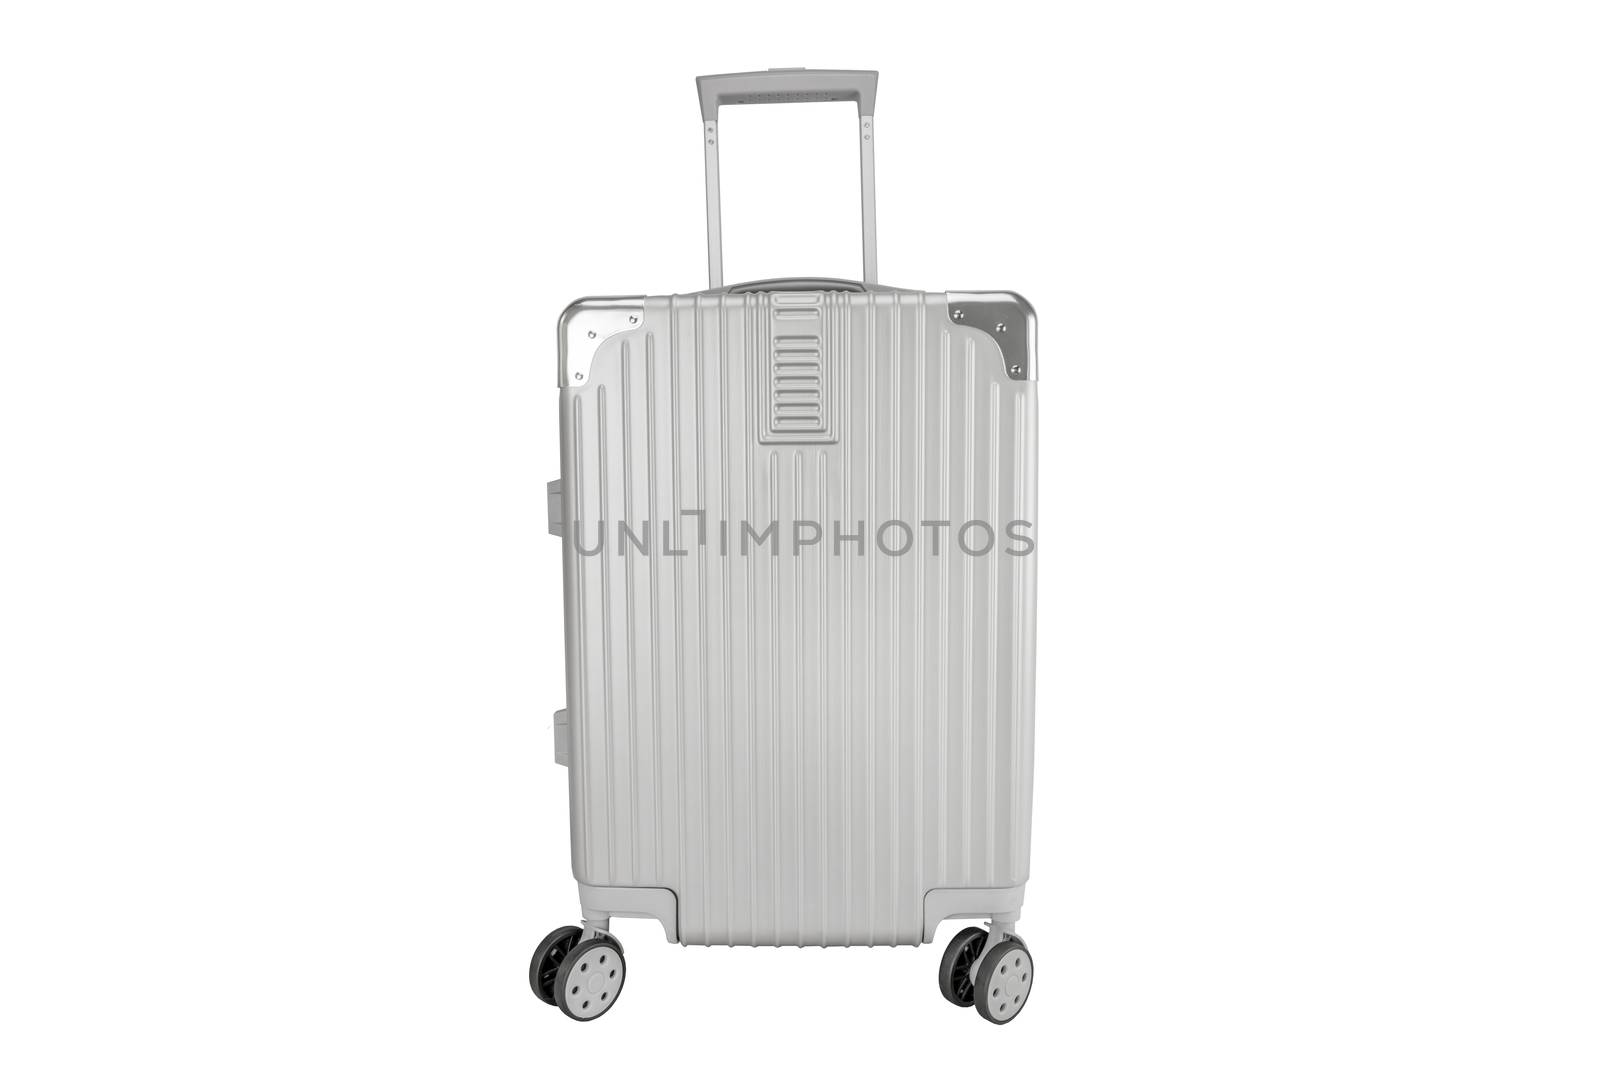 Silver luggage bag on isolated white background